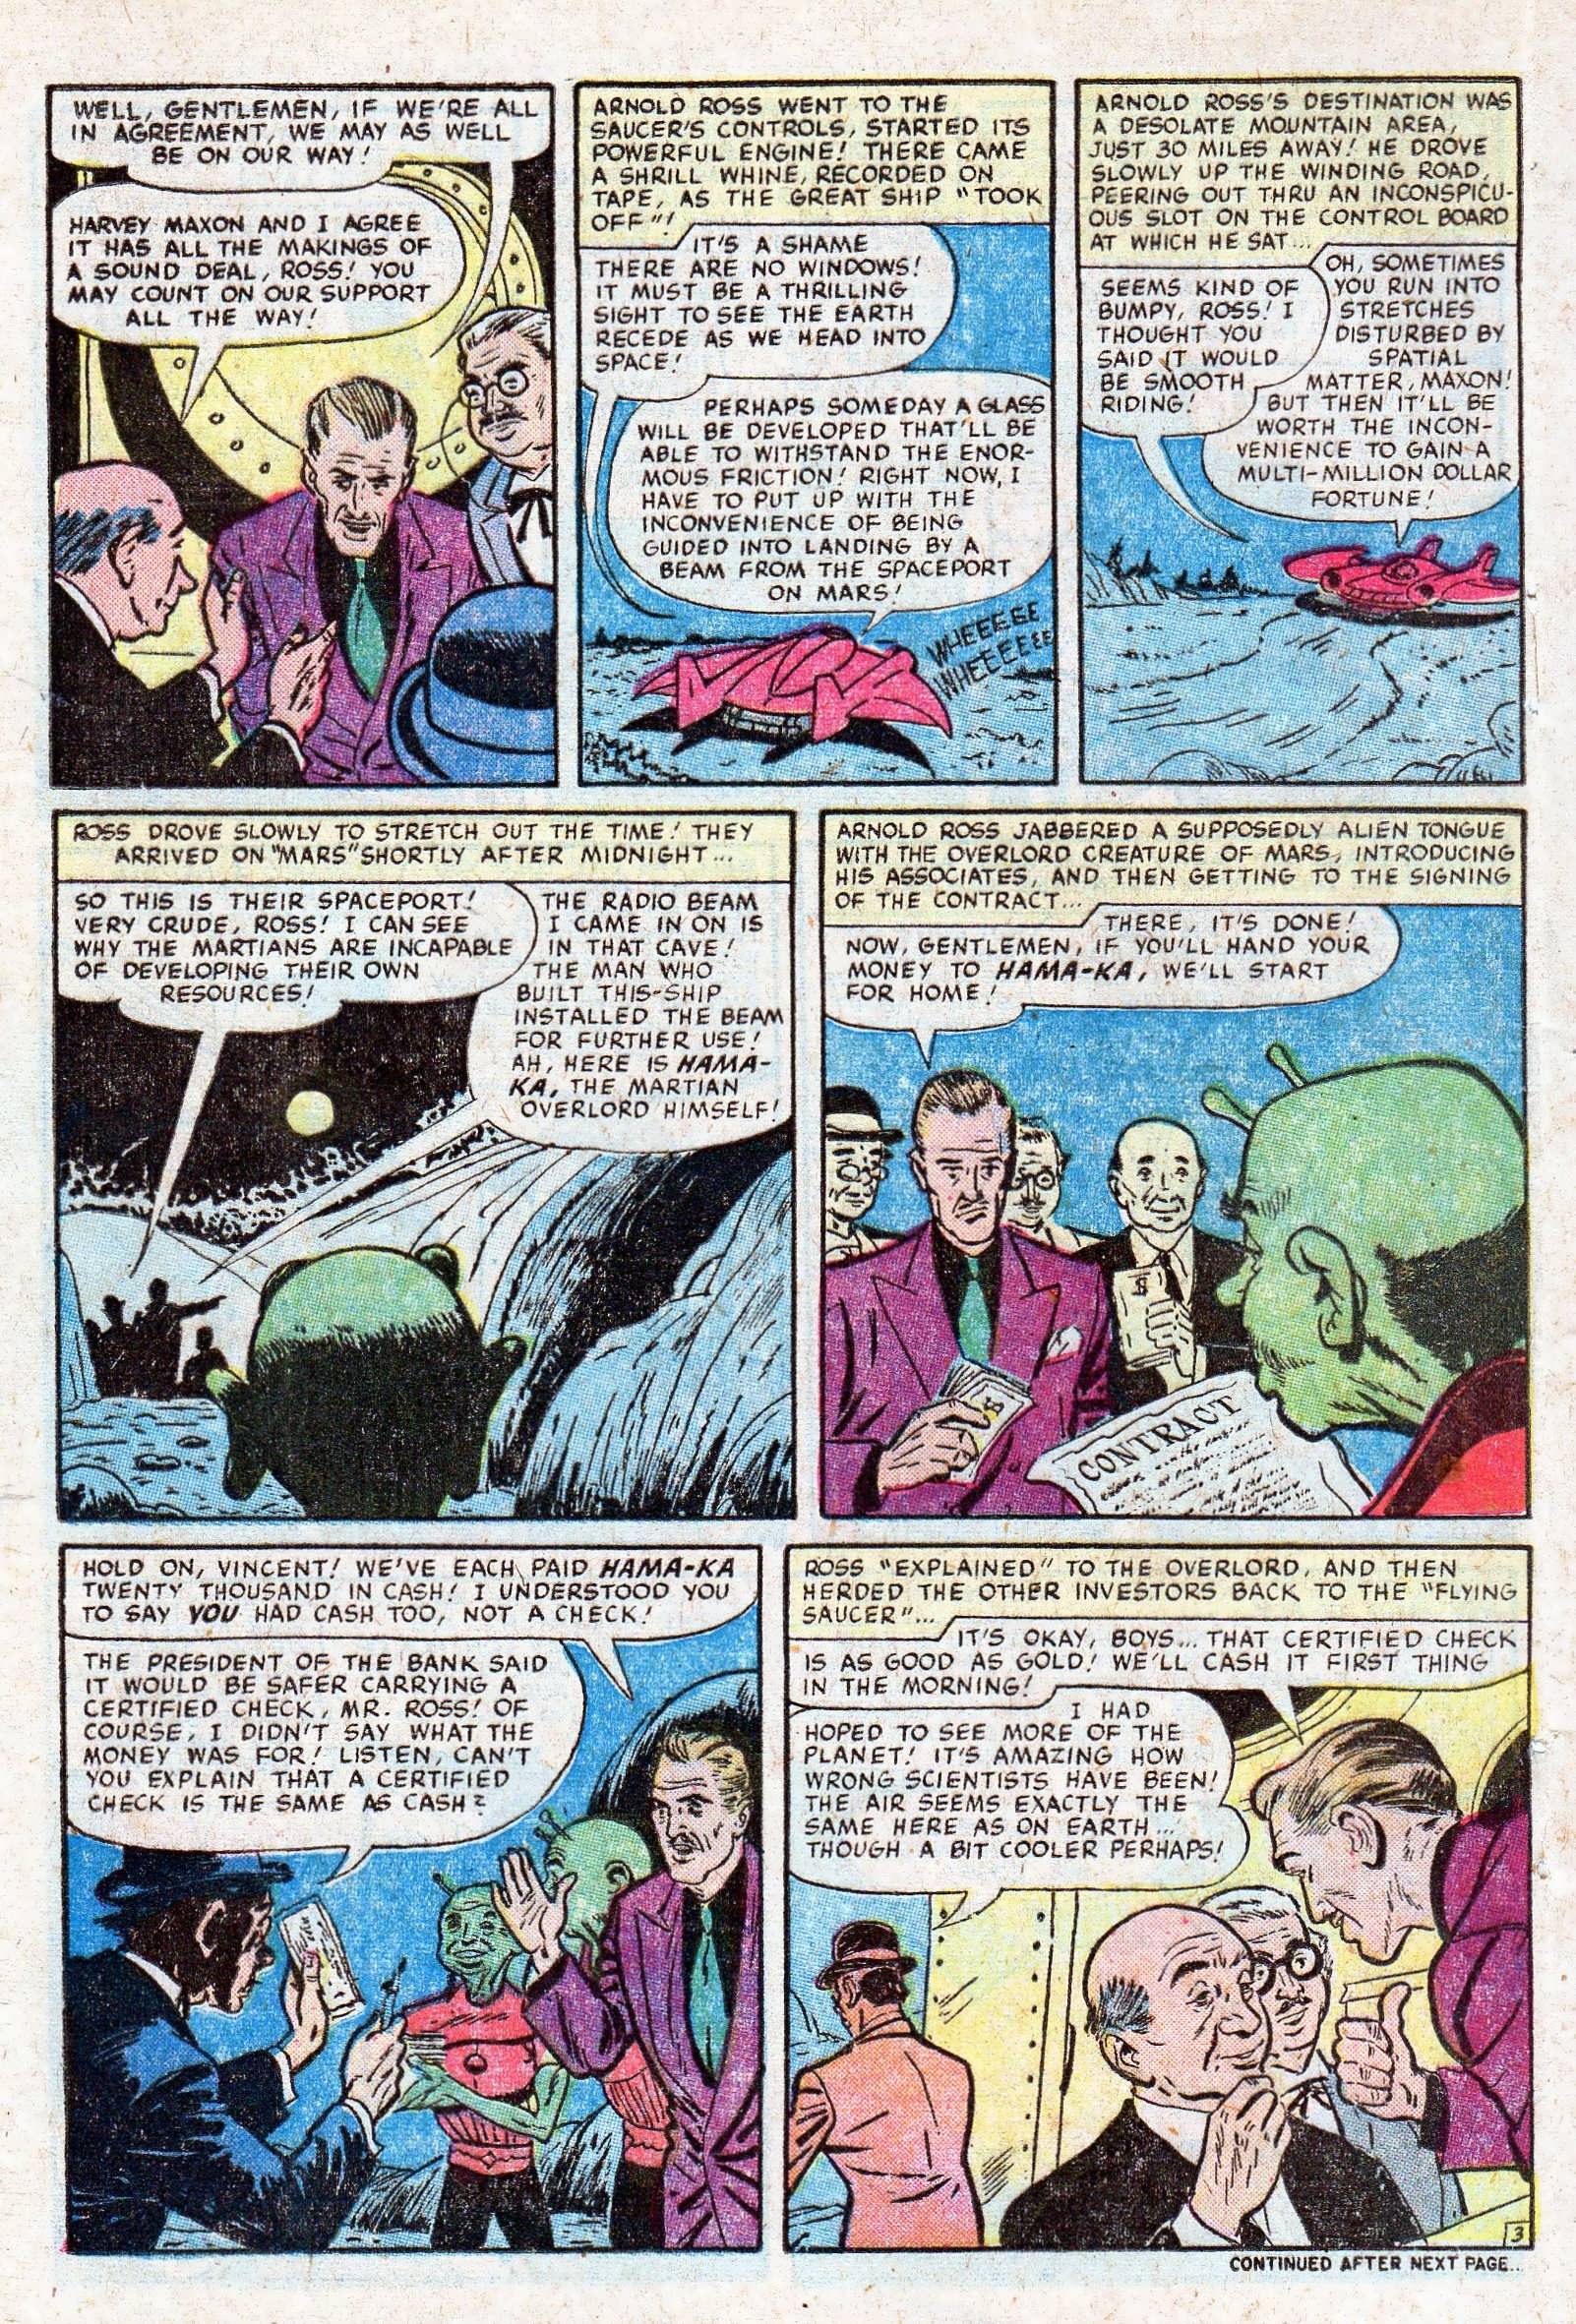 Marvel Tales (1949) 155 Page 23